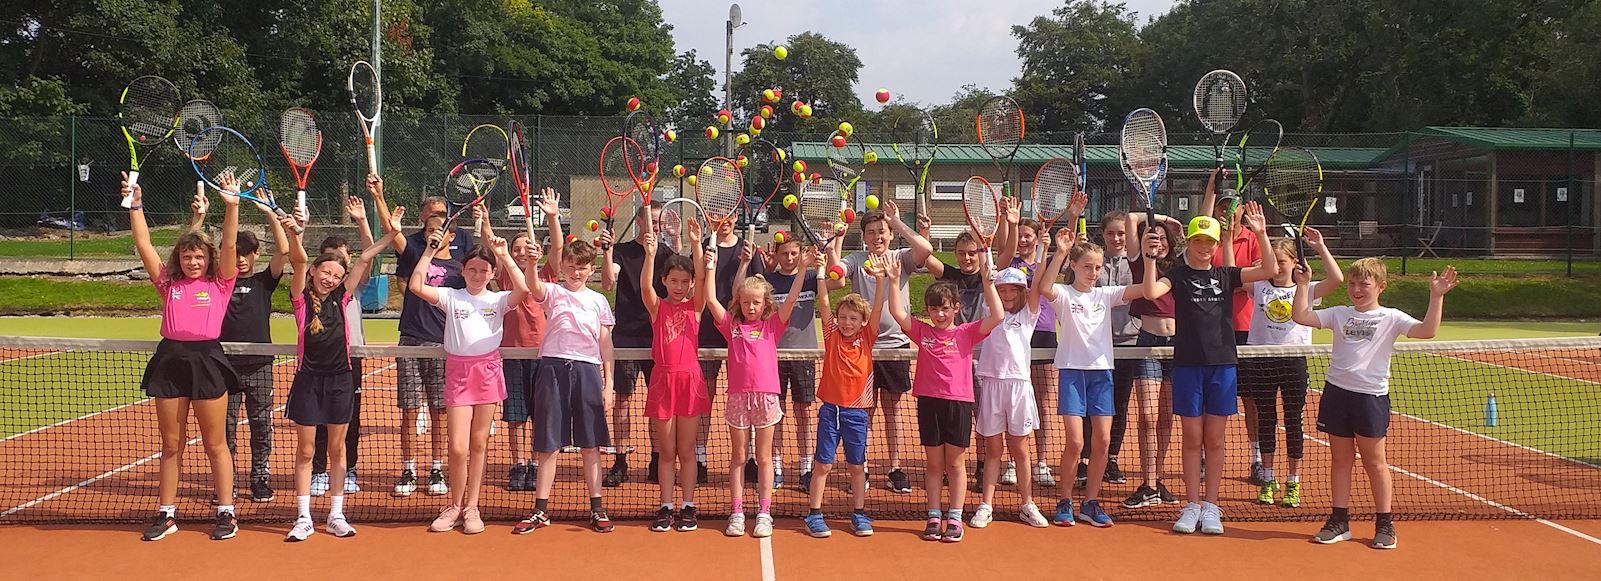 Woodside Tennis Club / Holiday Camps for Juniors